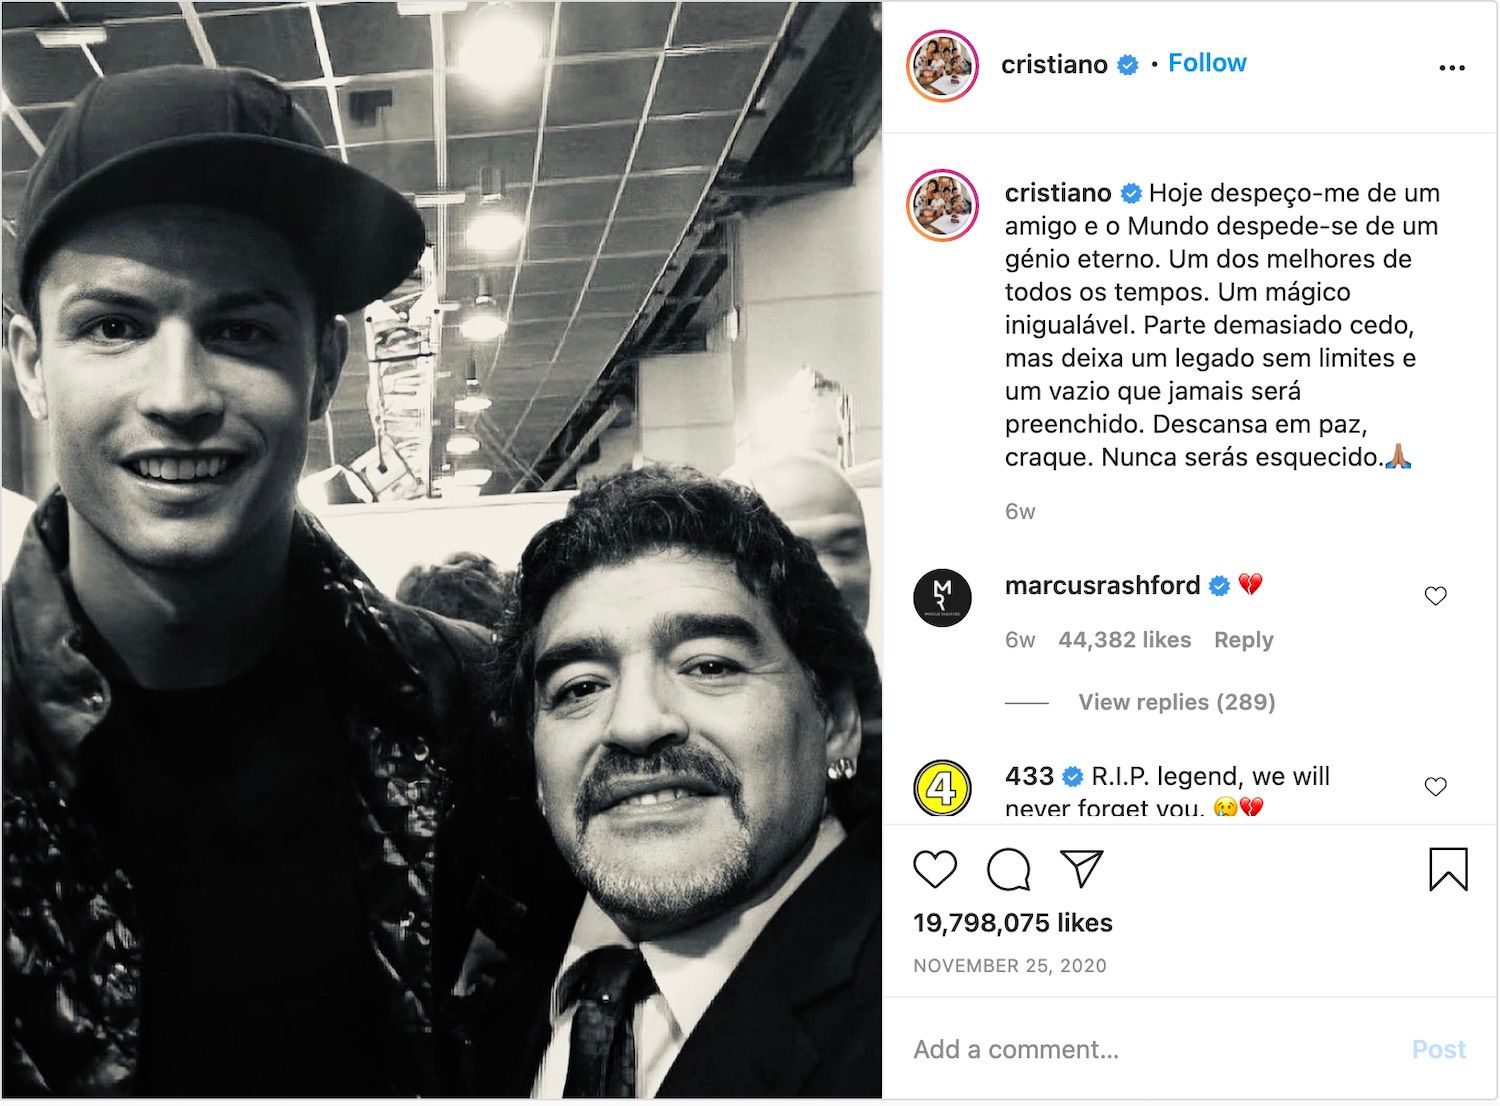 Cristiano's Instagram post to memorize Diego Maradona received the post likes in 2020.